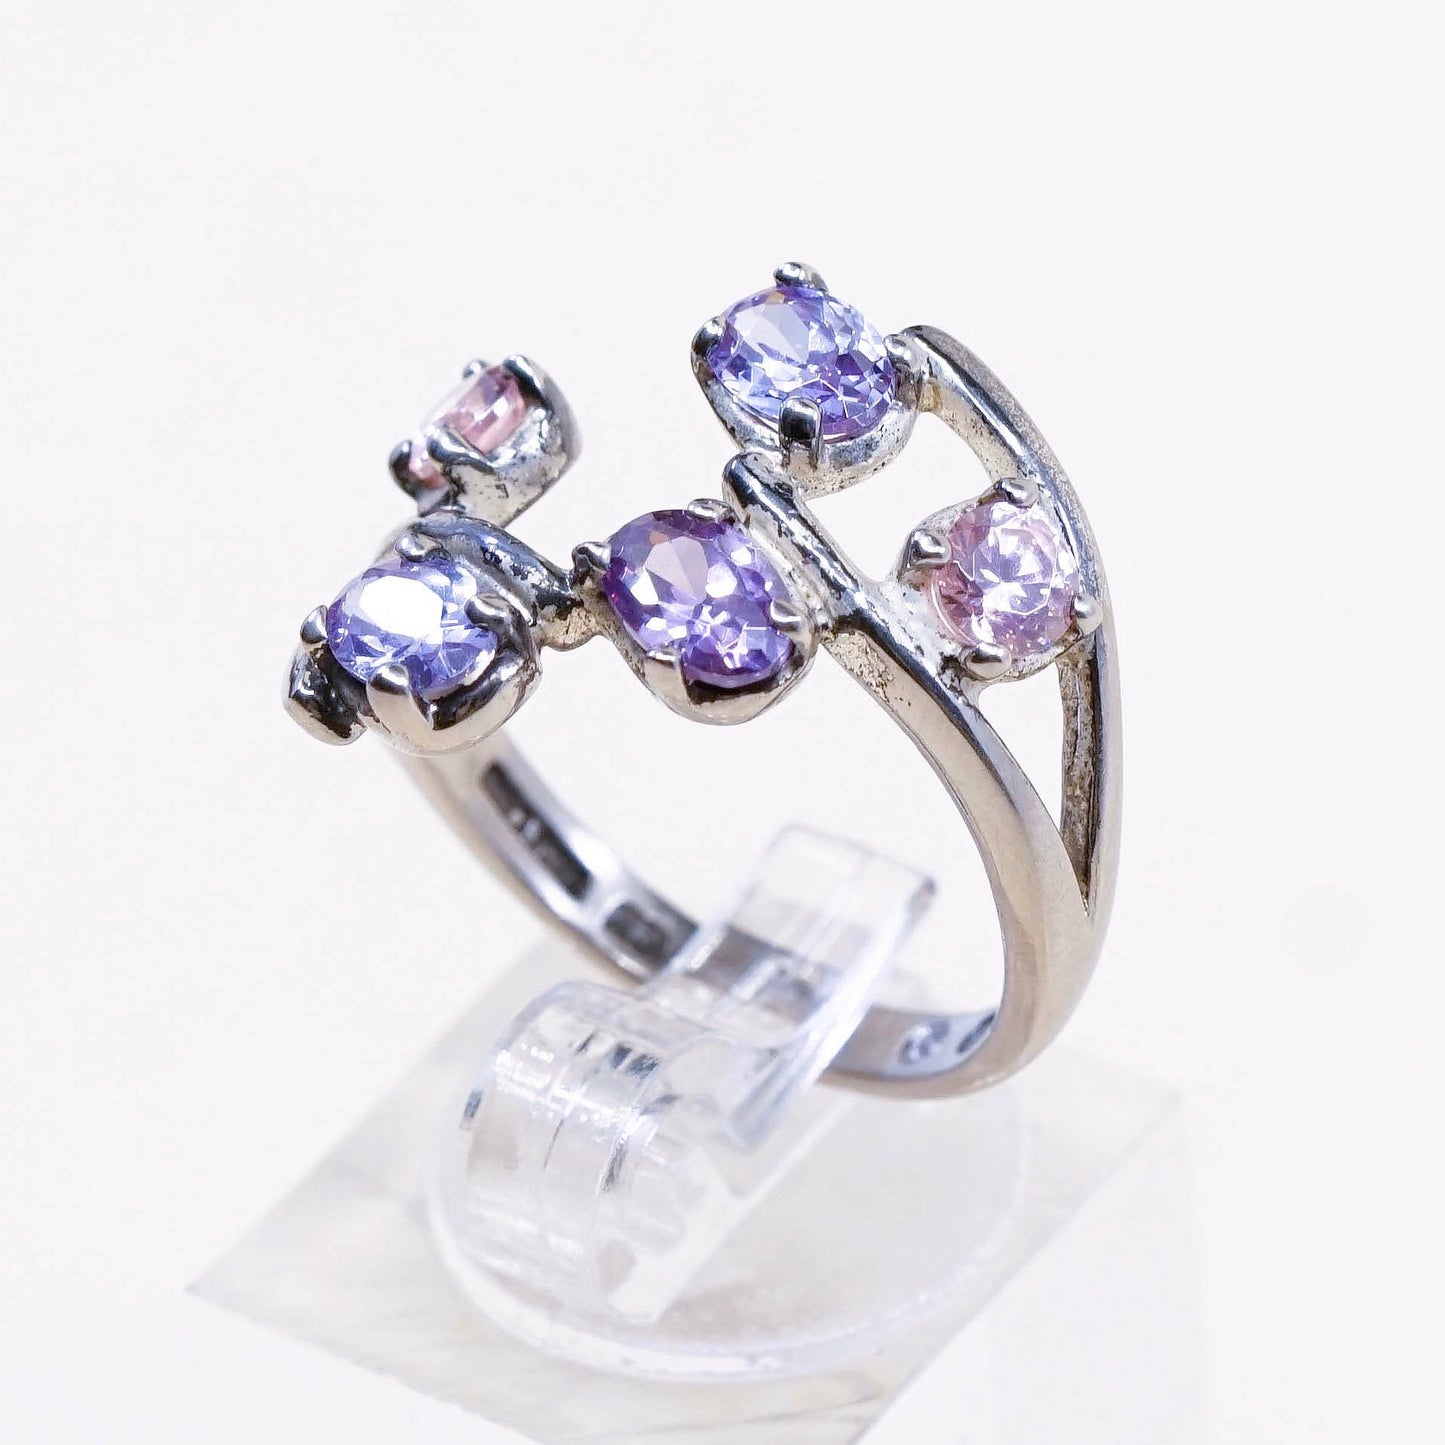 sz 8.25, vtg Sterling silver handmade cocktail ring, 925 with cluster amethyst